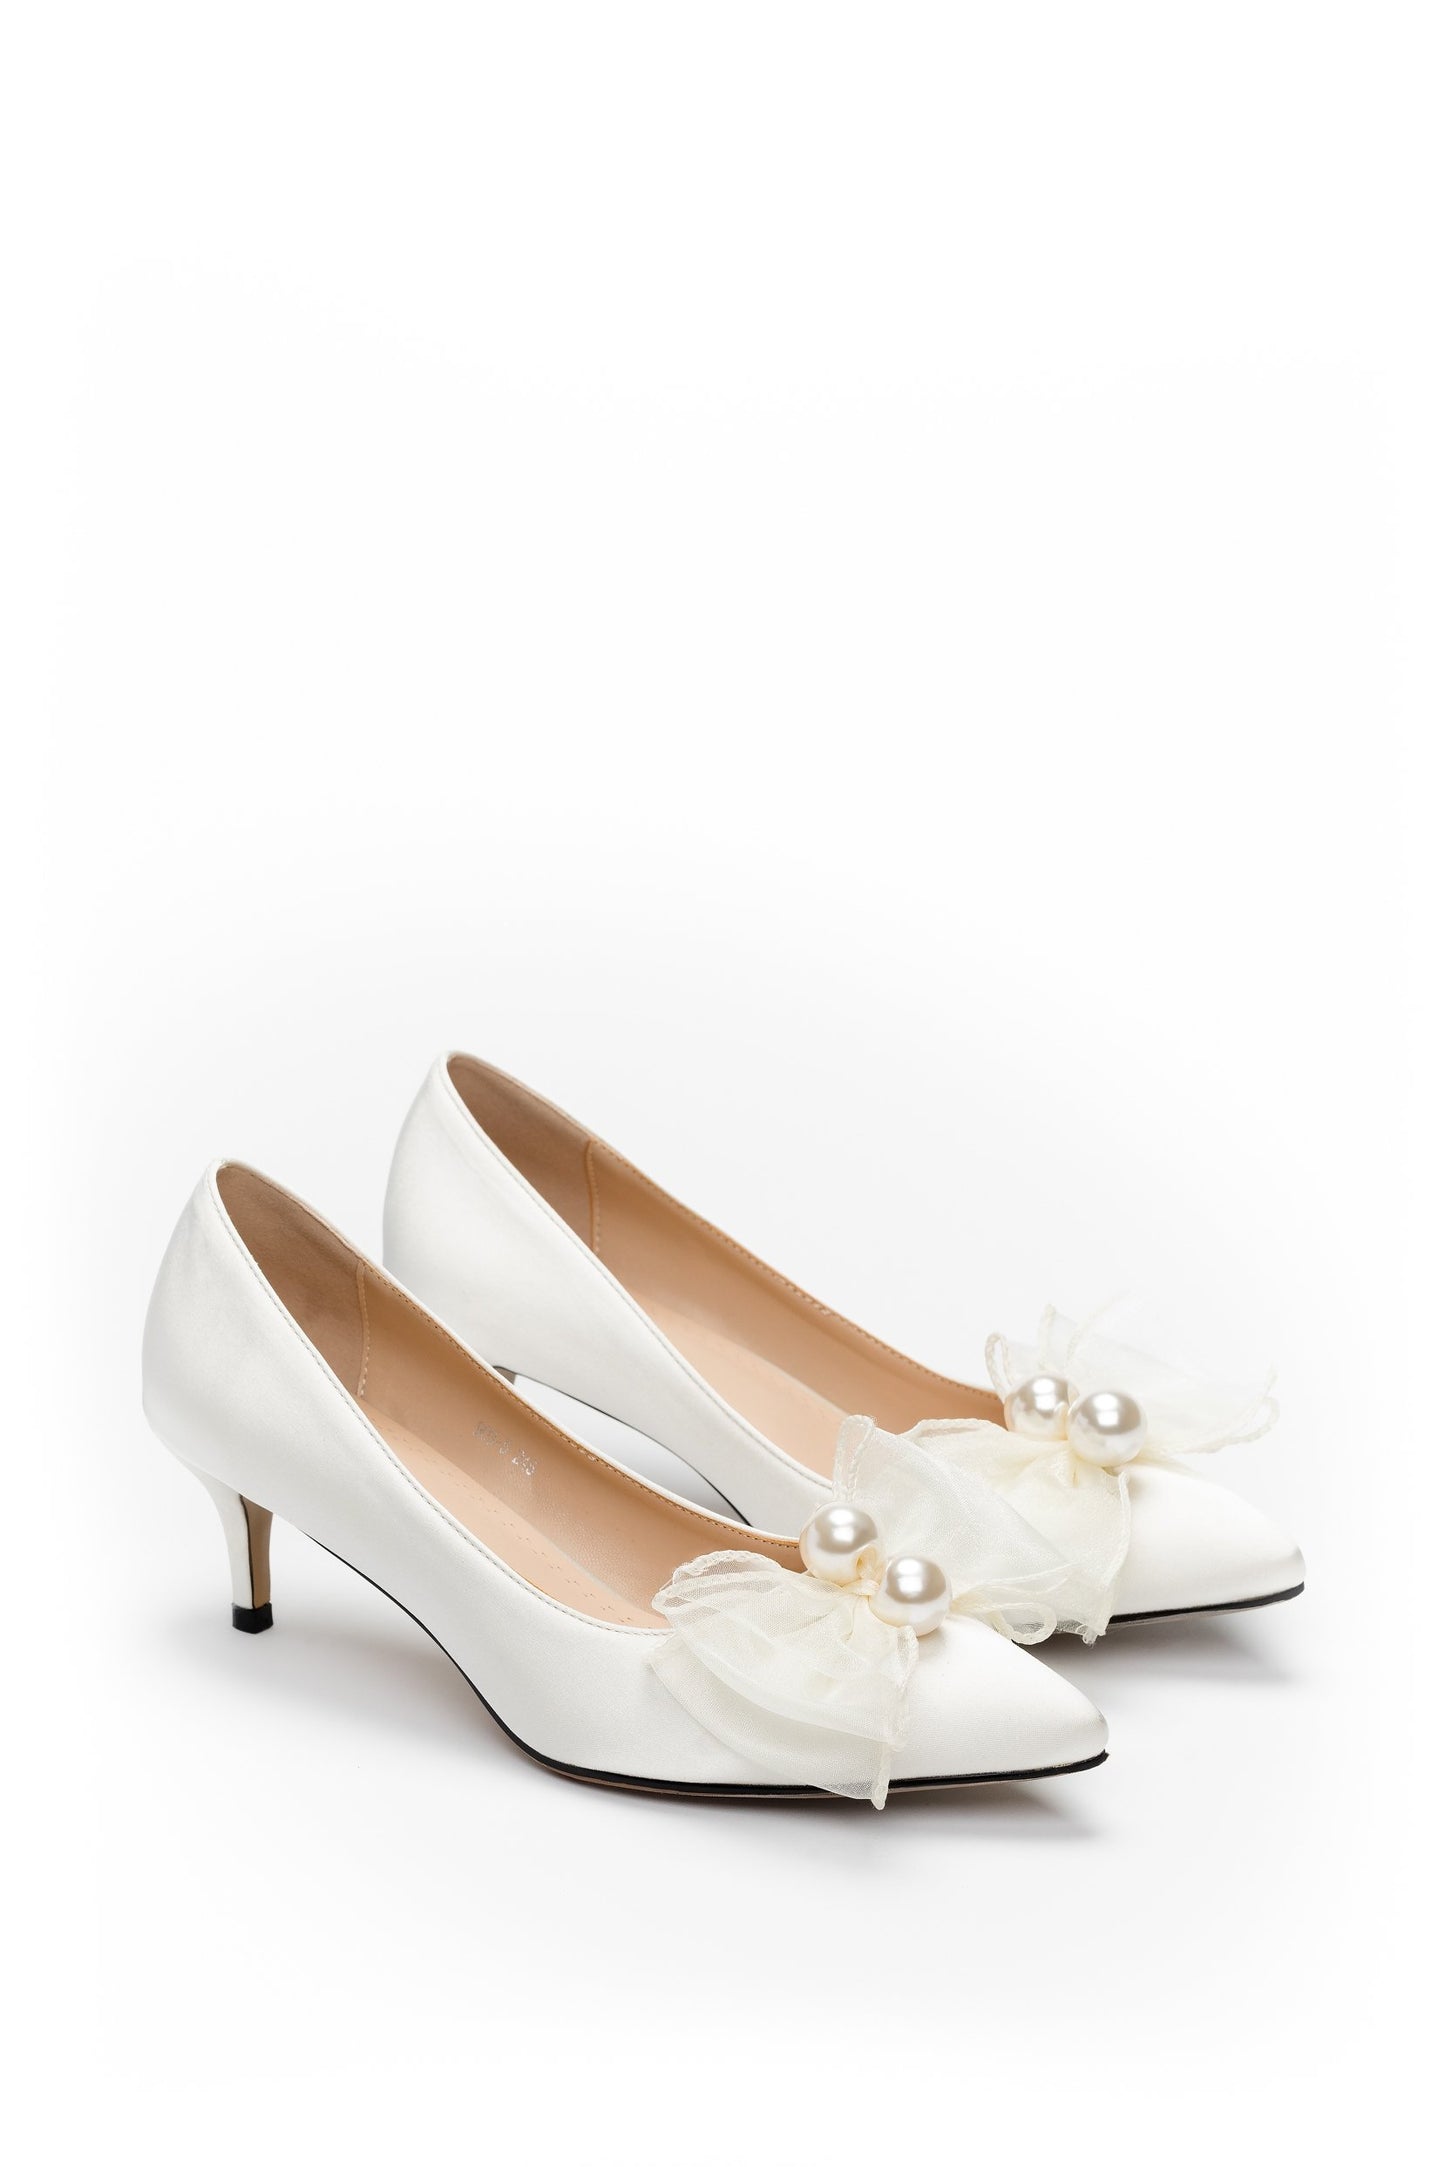 Stiletto Heel Satin Pointed Toe Bridal Shoes Bowknot CK0104